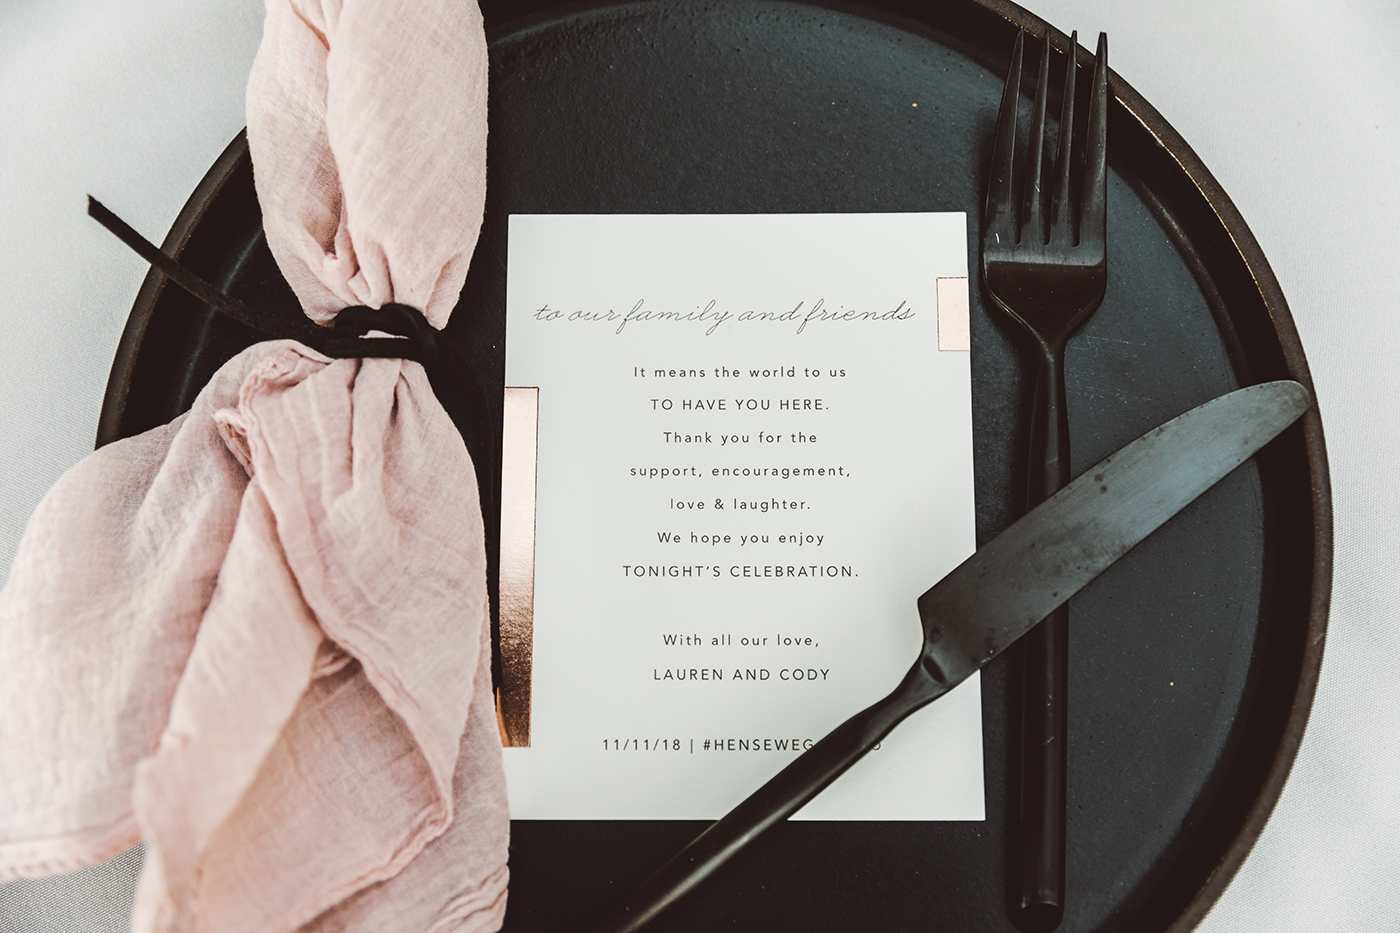 Pink and black table setting